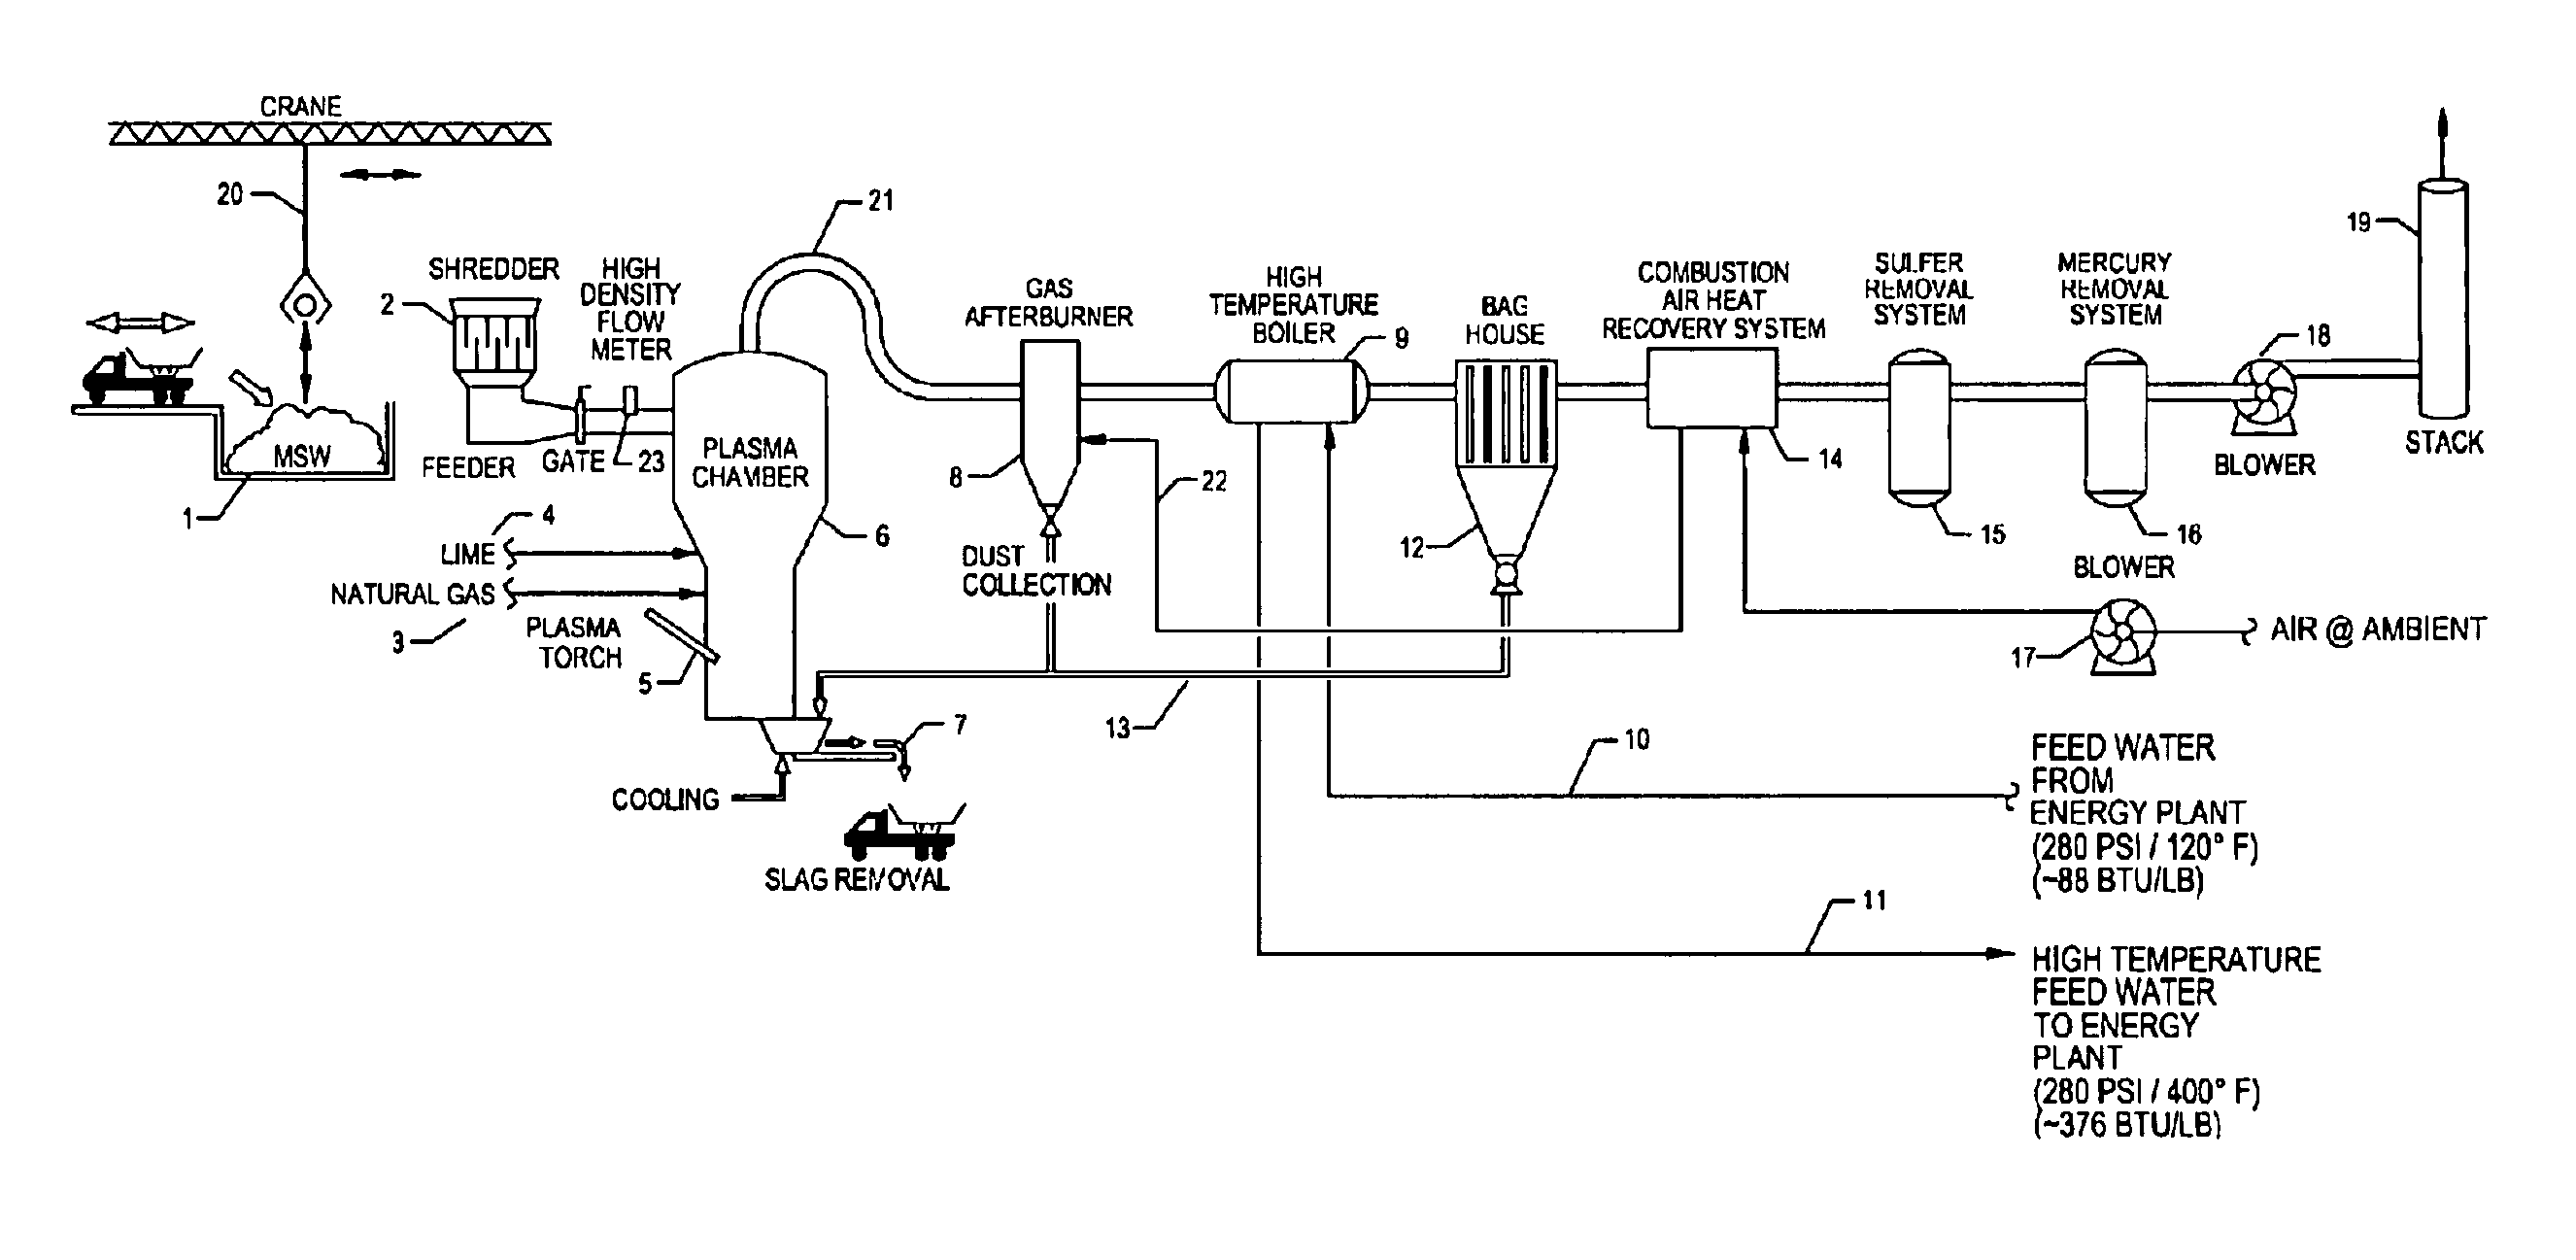 Plasma Feedwater and/or Make Up Water Energy Transfer System